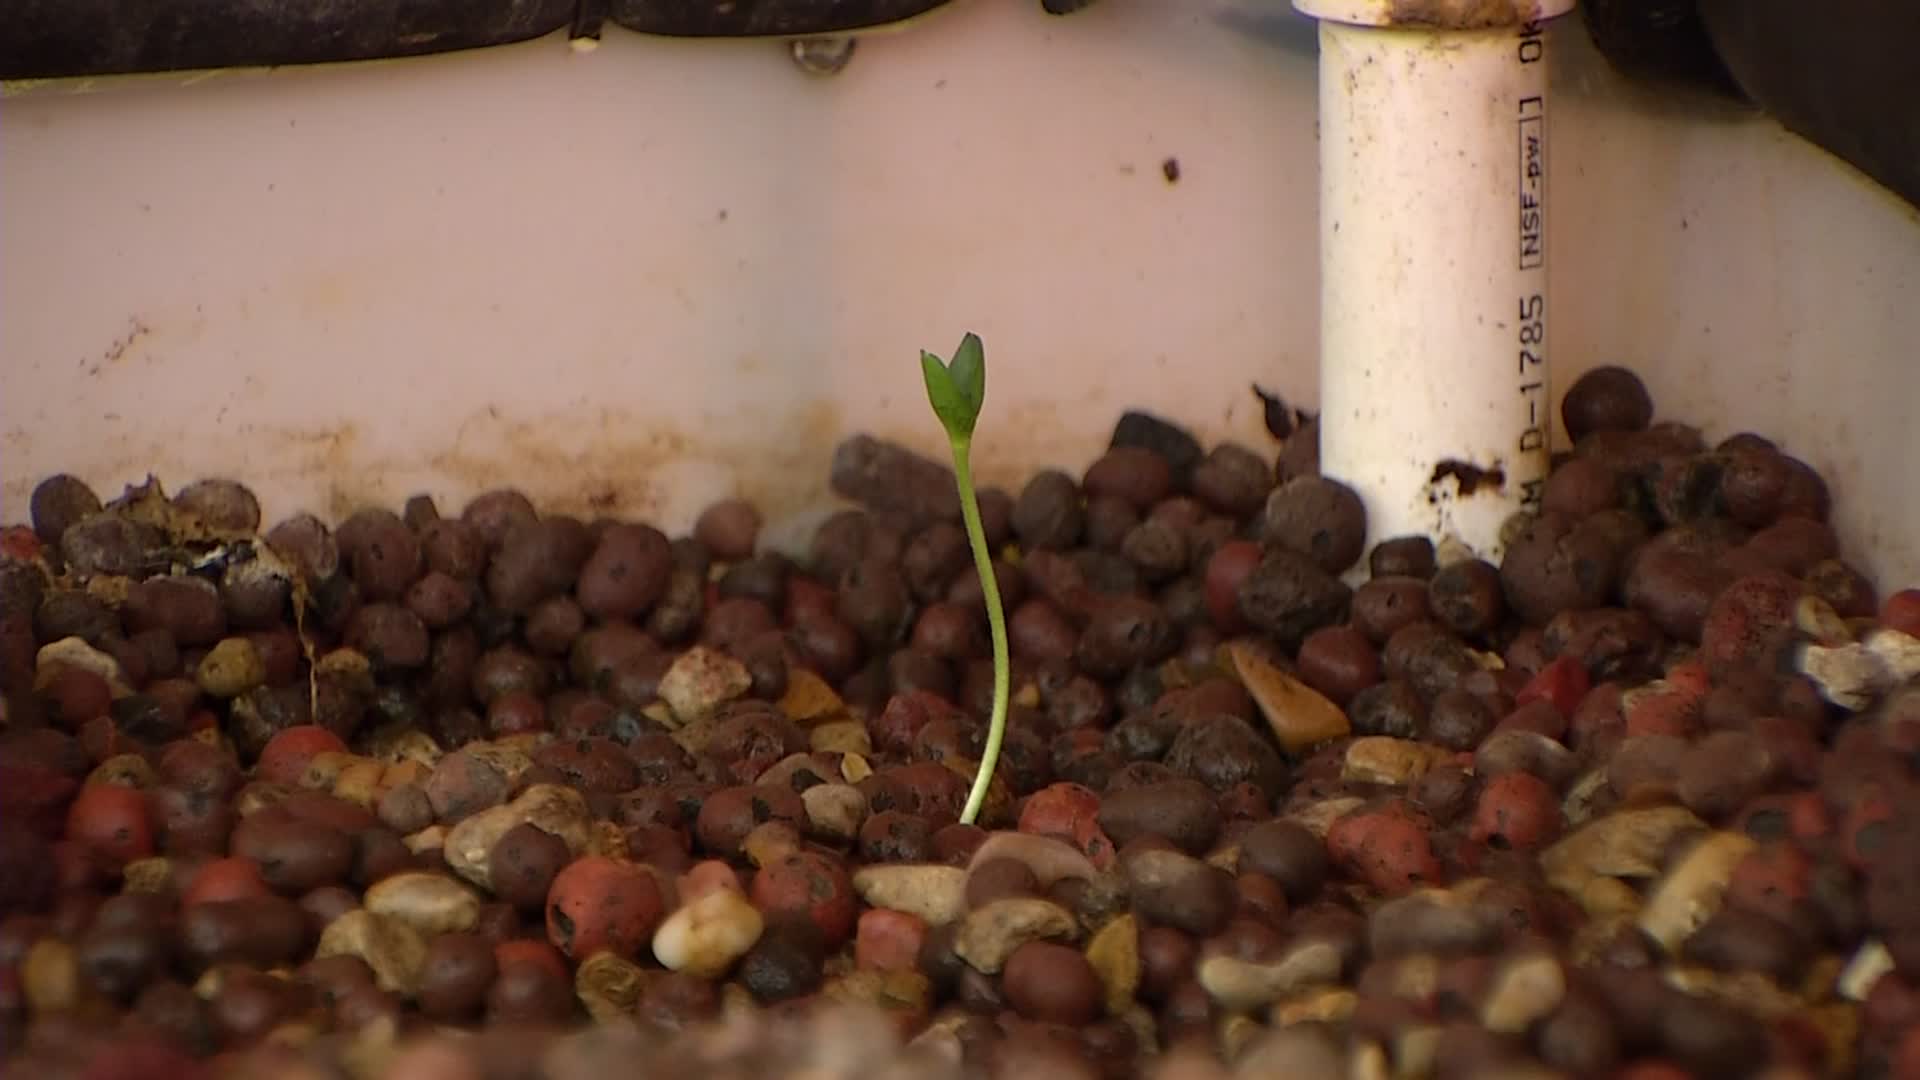 Dallas Students Use "Aquaponics" To Grow Healthy Food | Fort Worth, TX ...